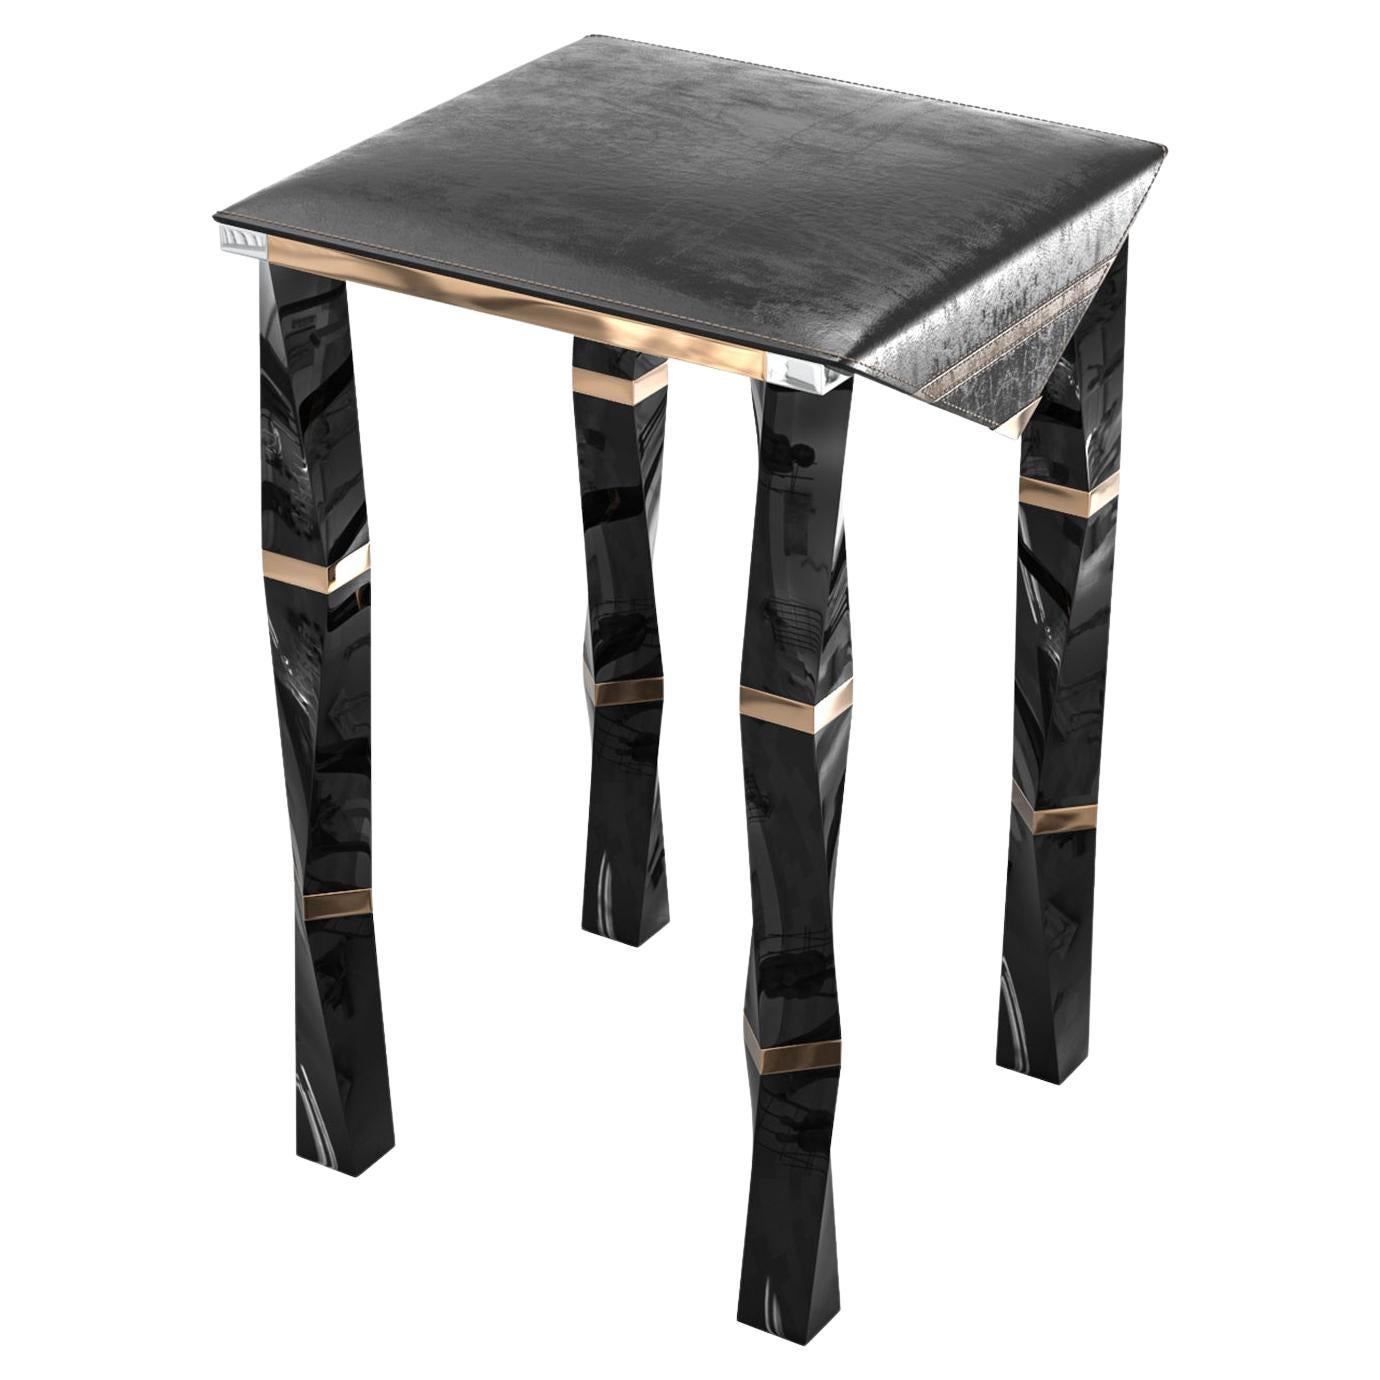 "Puledri" Bar Stool with Stainless Steel and Bronze, Istanbul